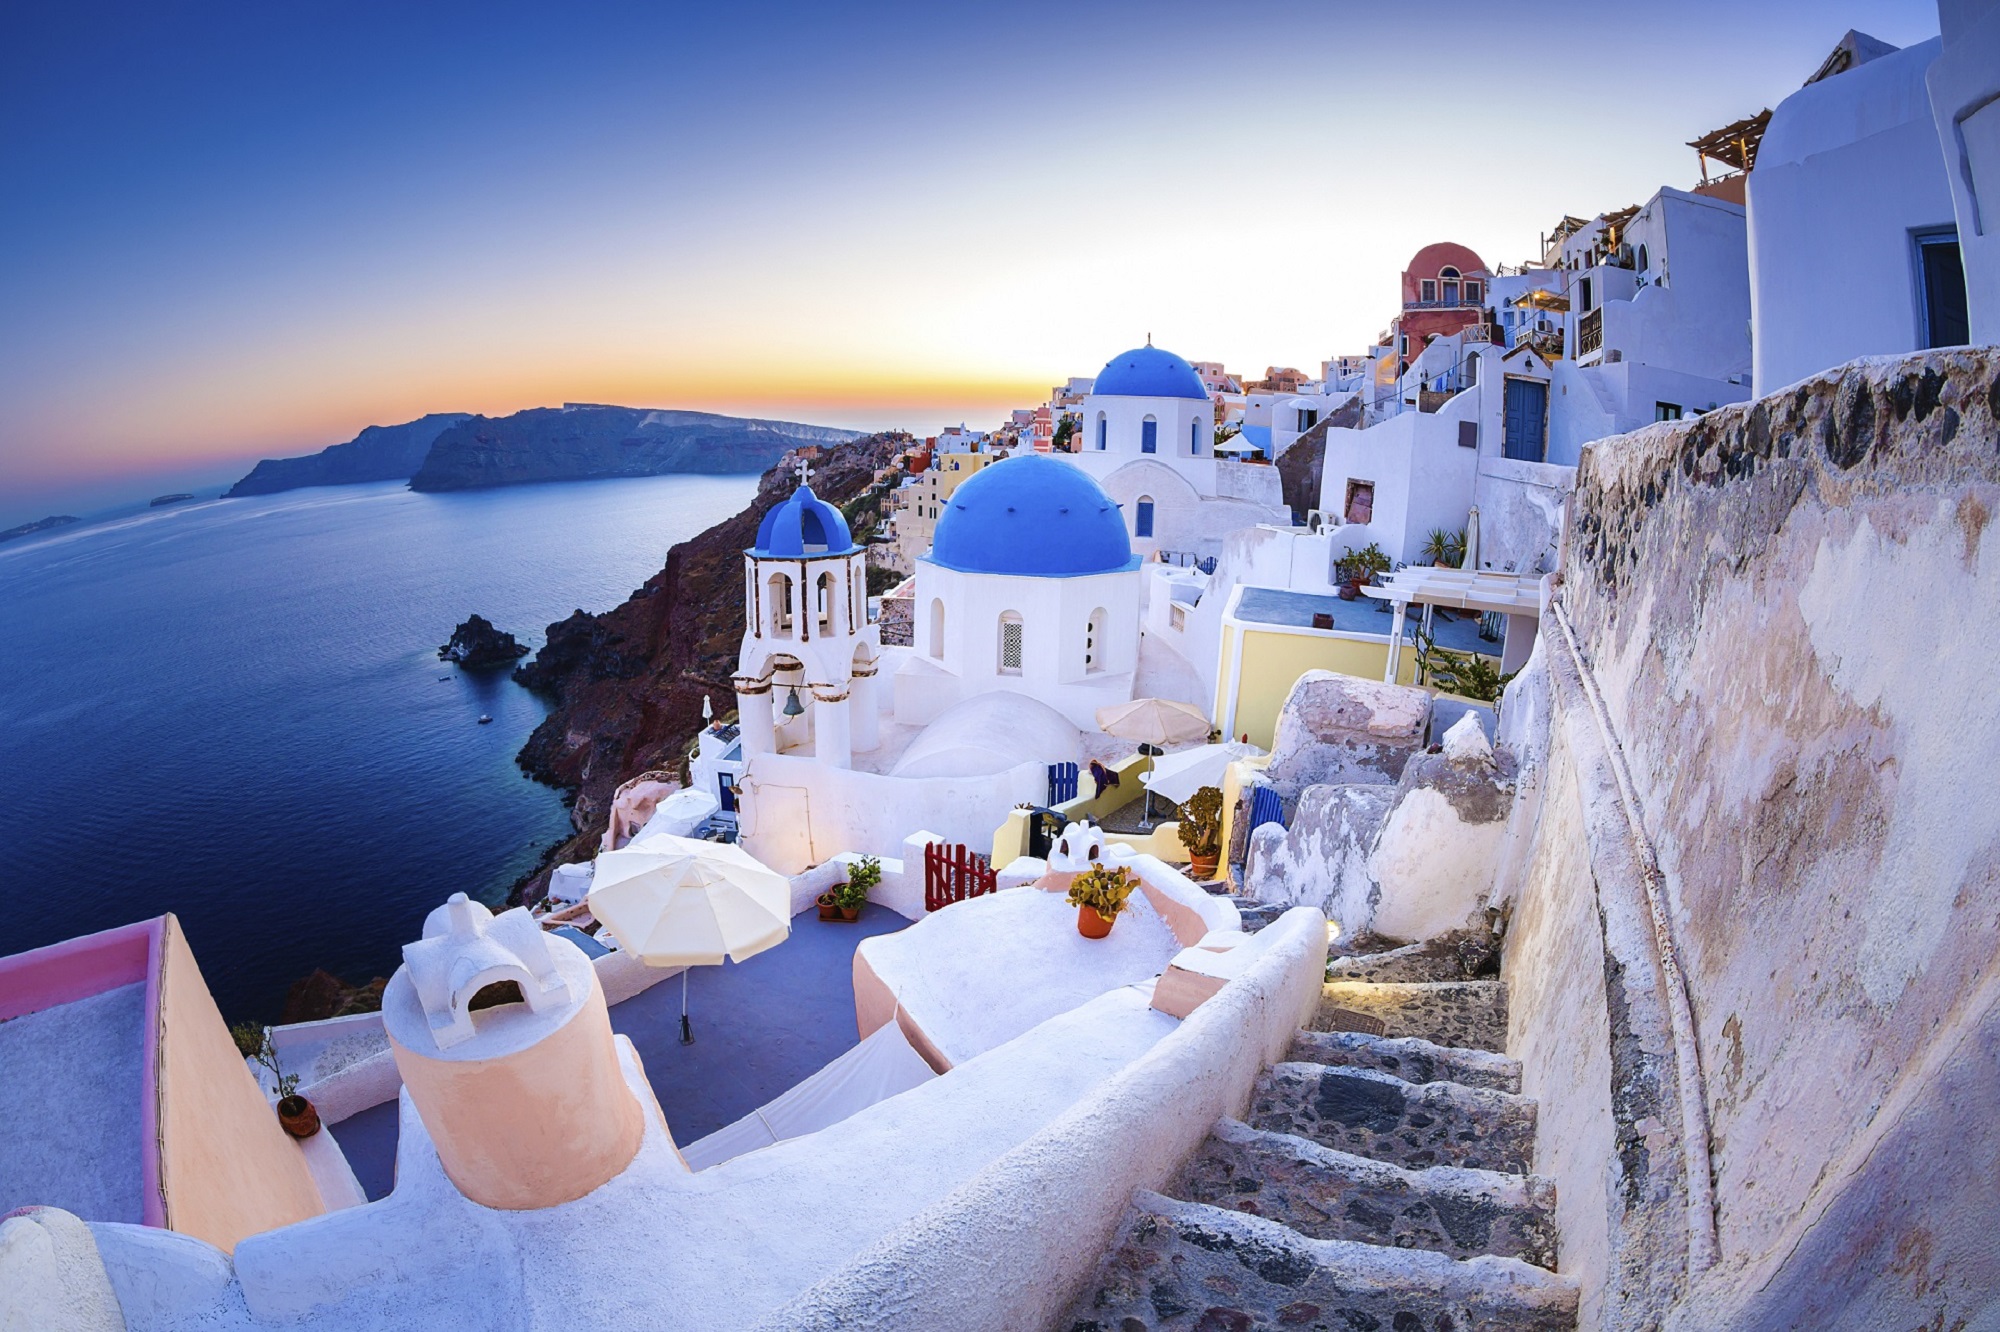 Santorini Holidays - Find the best offers to escape to this Greek island